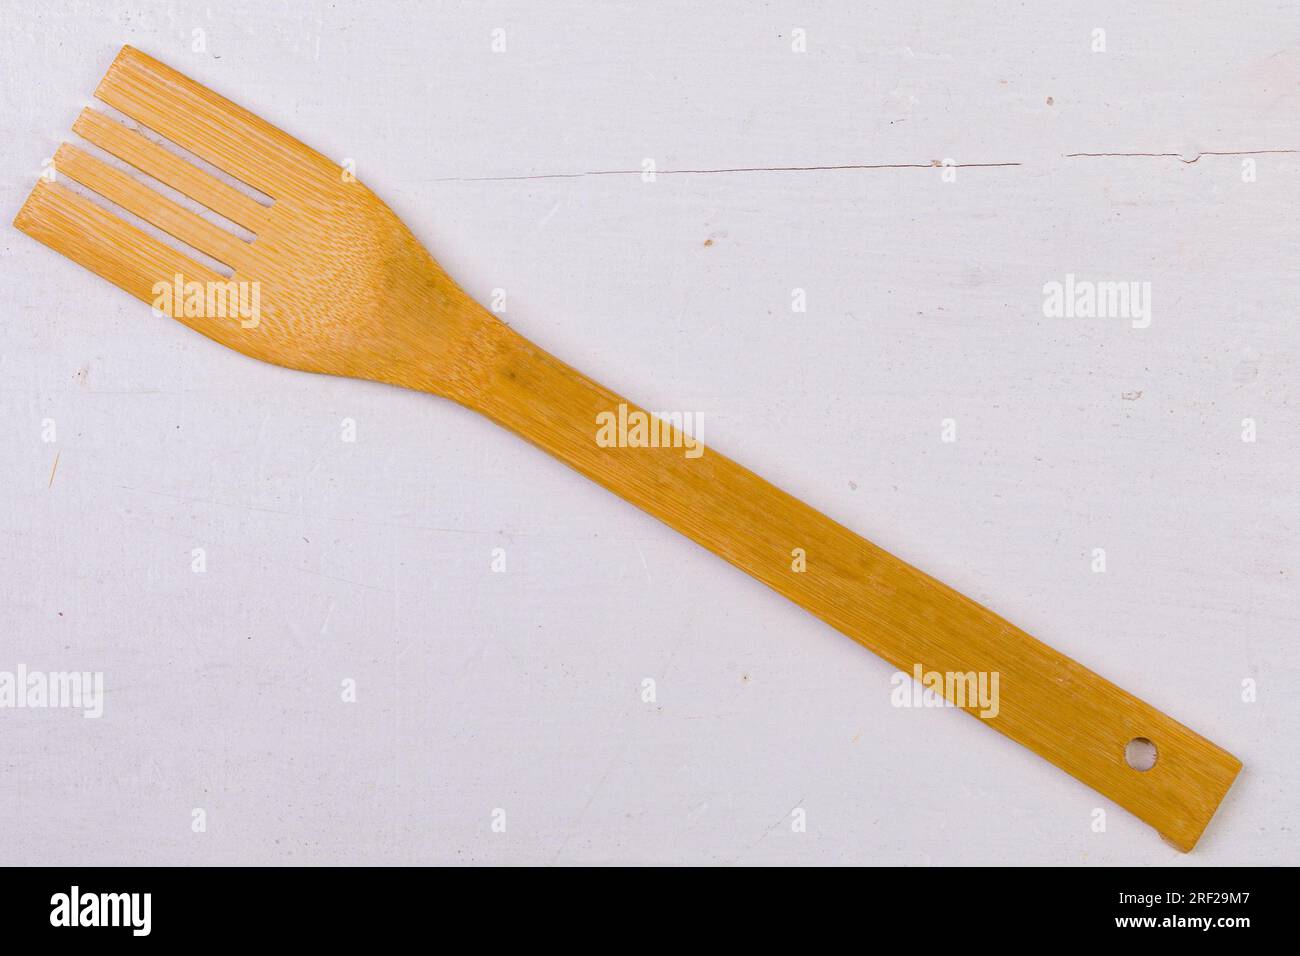 Antony Trivet Kenya Professional Commercial Advertising Marketing Products Photographers Wooden kitchenware utensils dishes for cooking Stock Photo